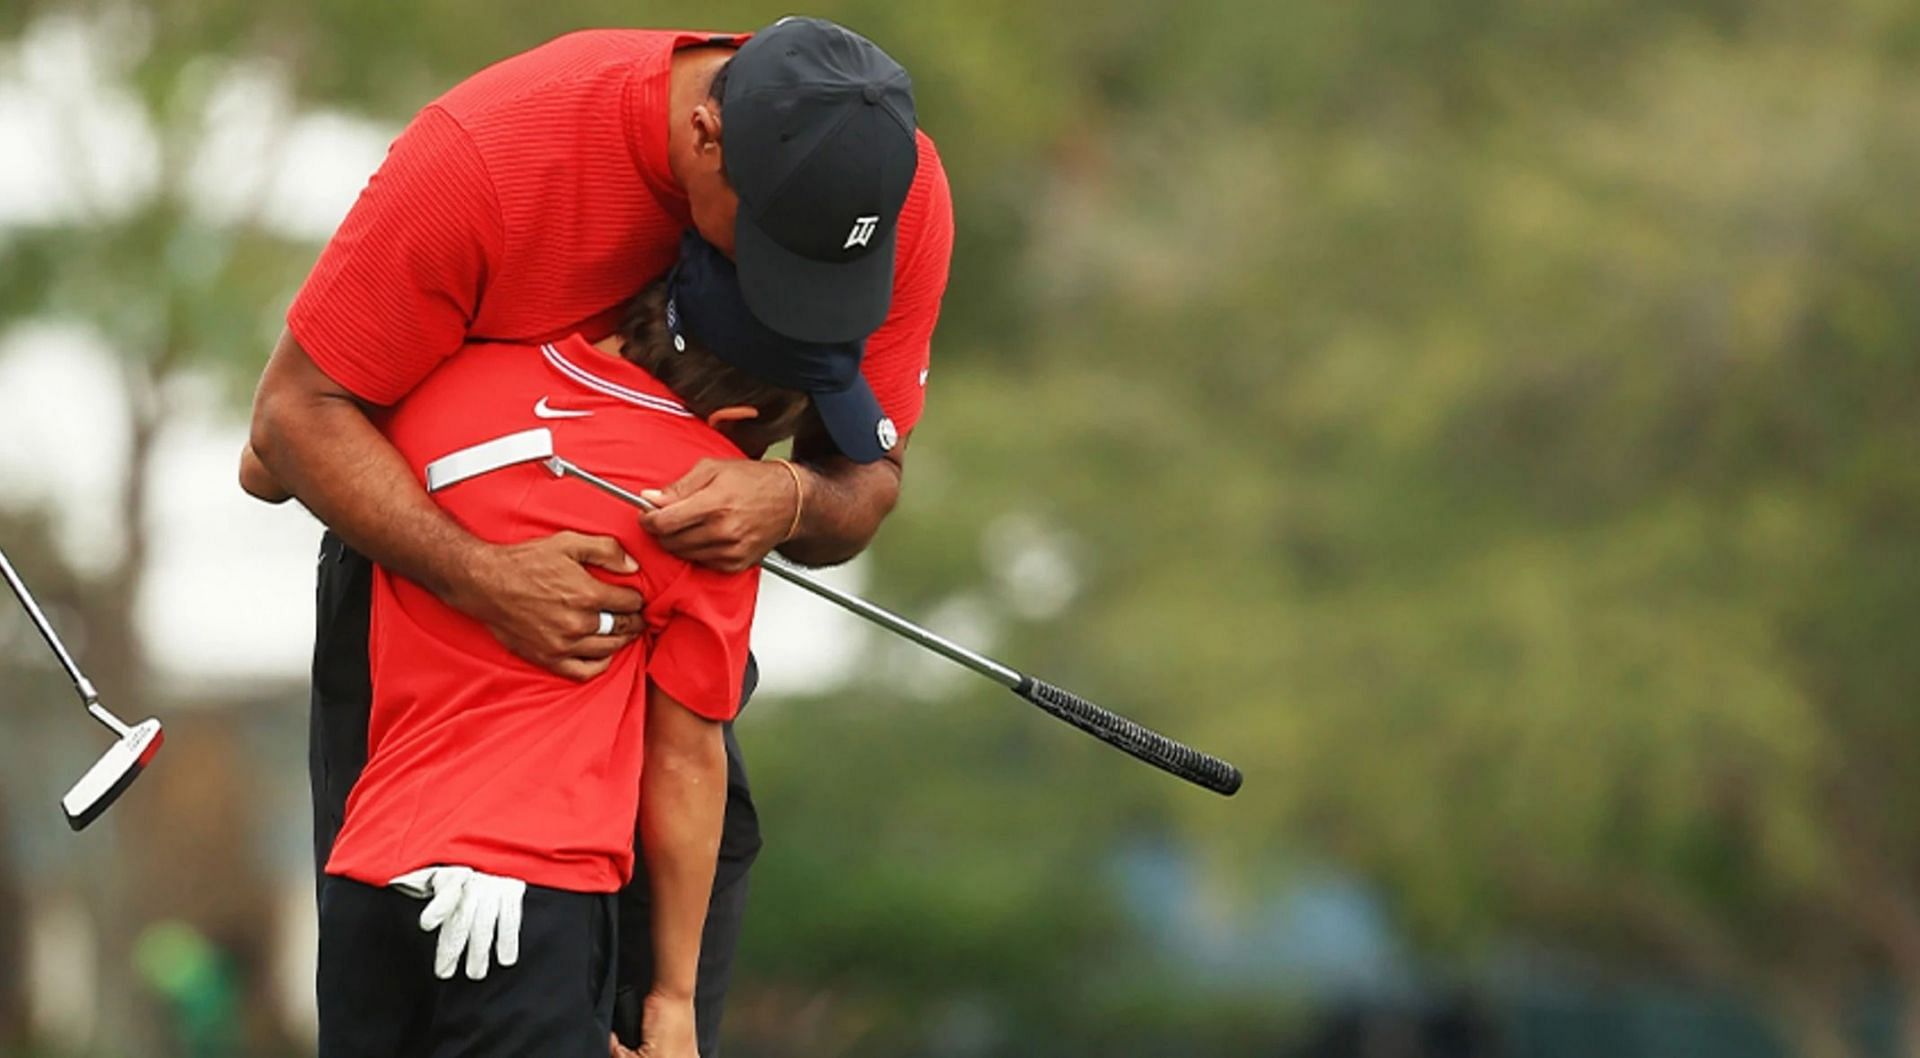 &ldquo;How much would you pay&rdquo; &ndash; Fans react to Charlie taking golf lessons from Tiger Woods